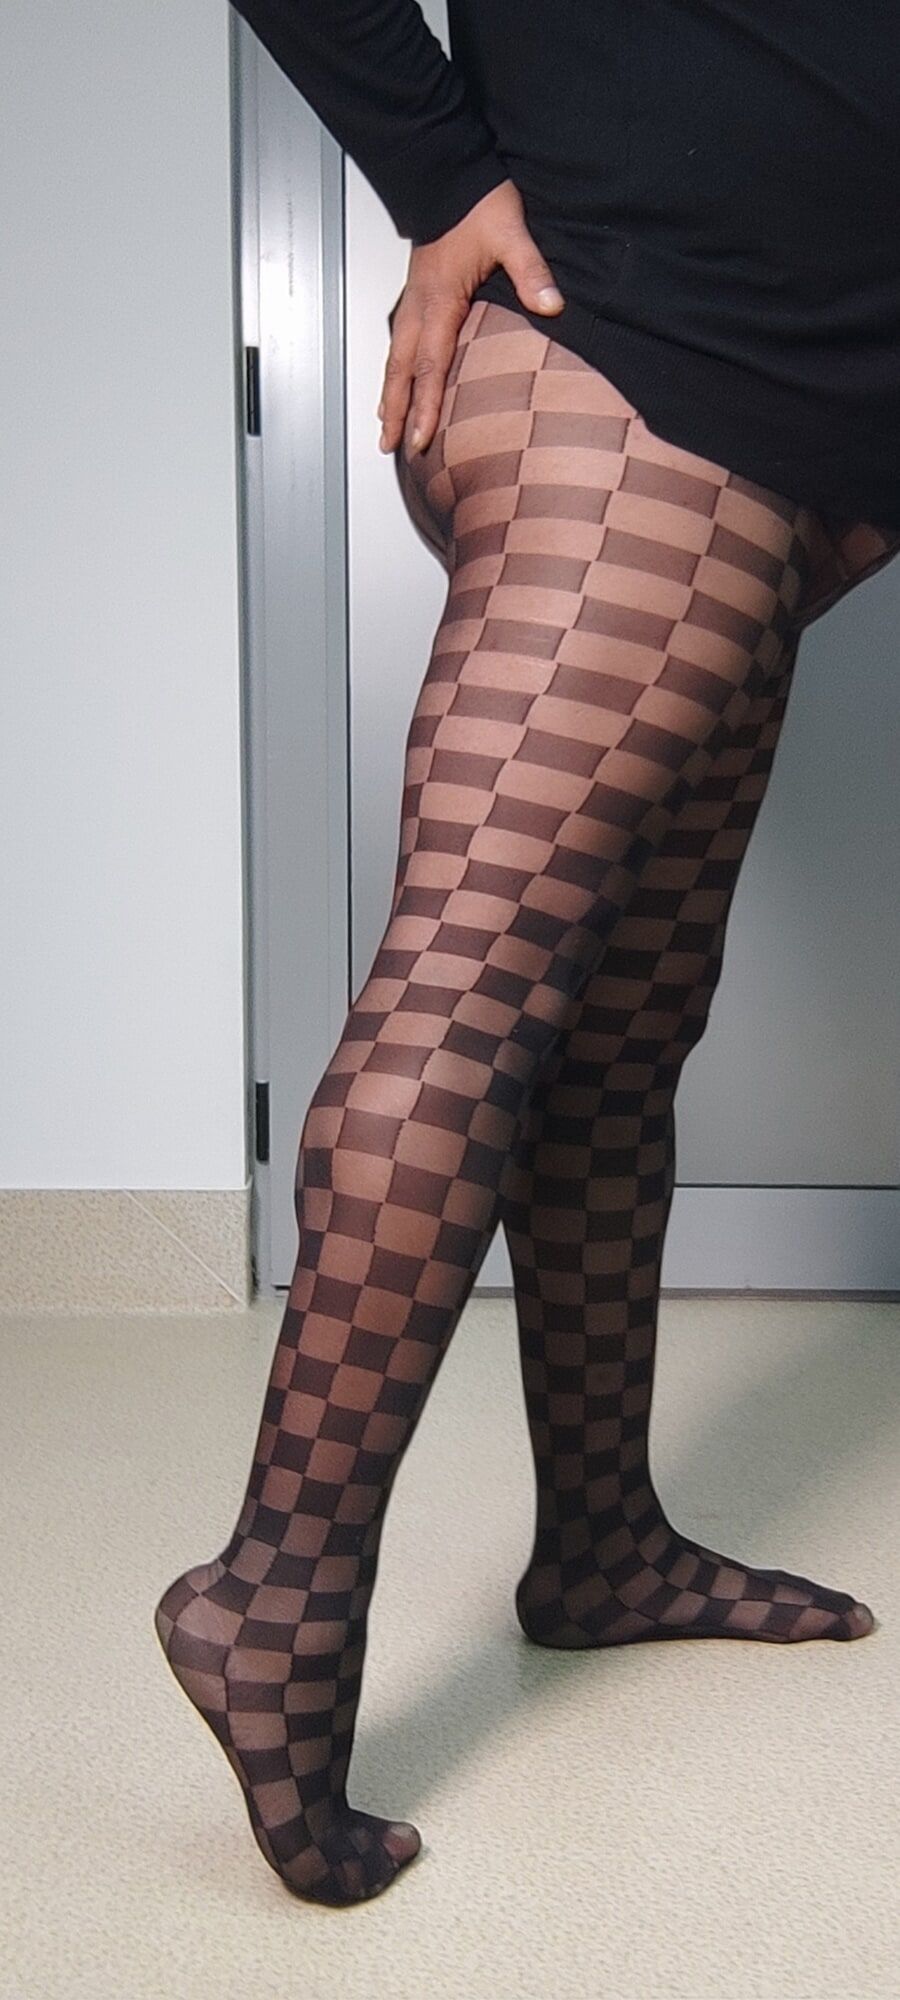 Black patterpantyhose on my sexy feet are so cool.Am i sexy? #17